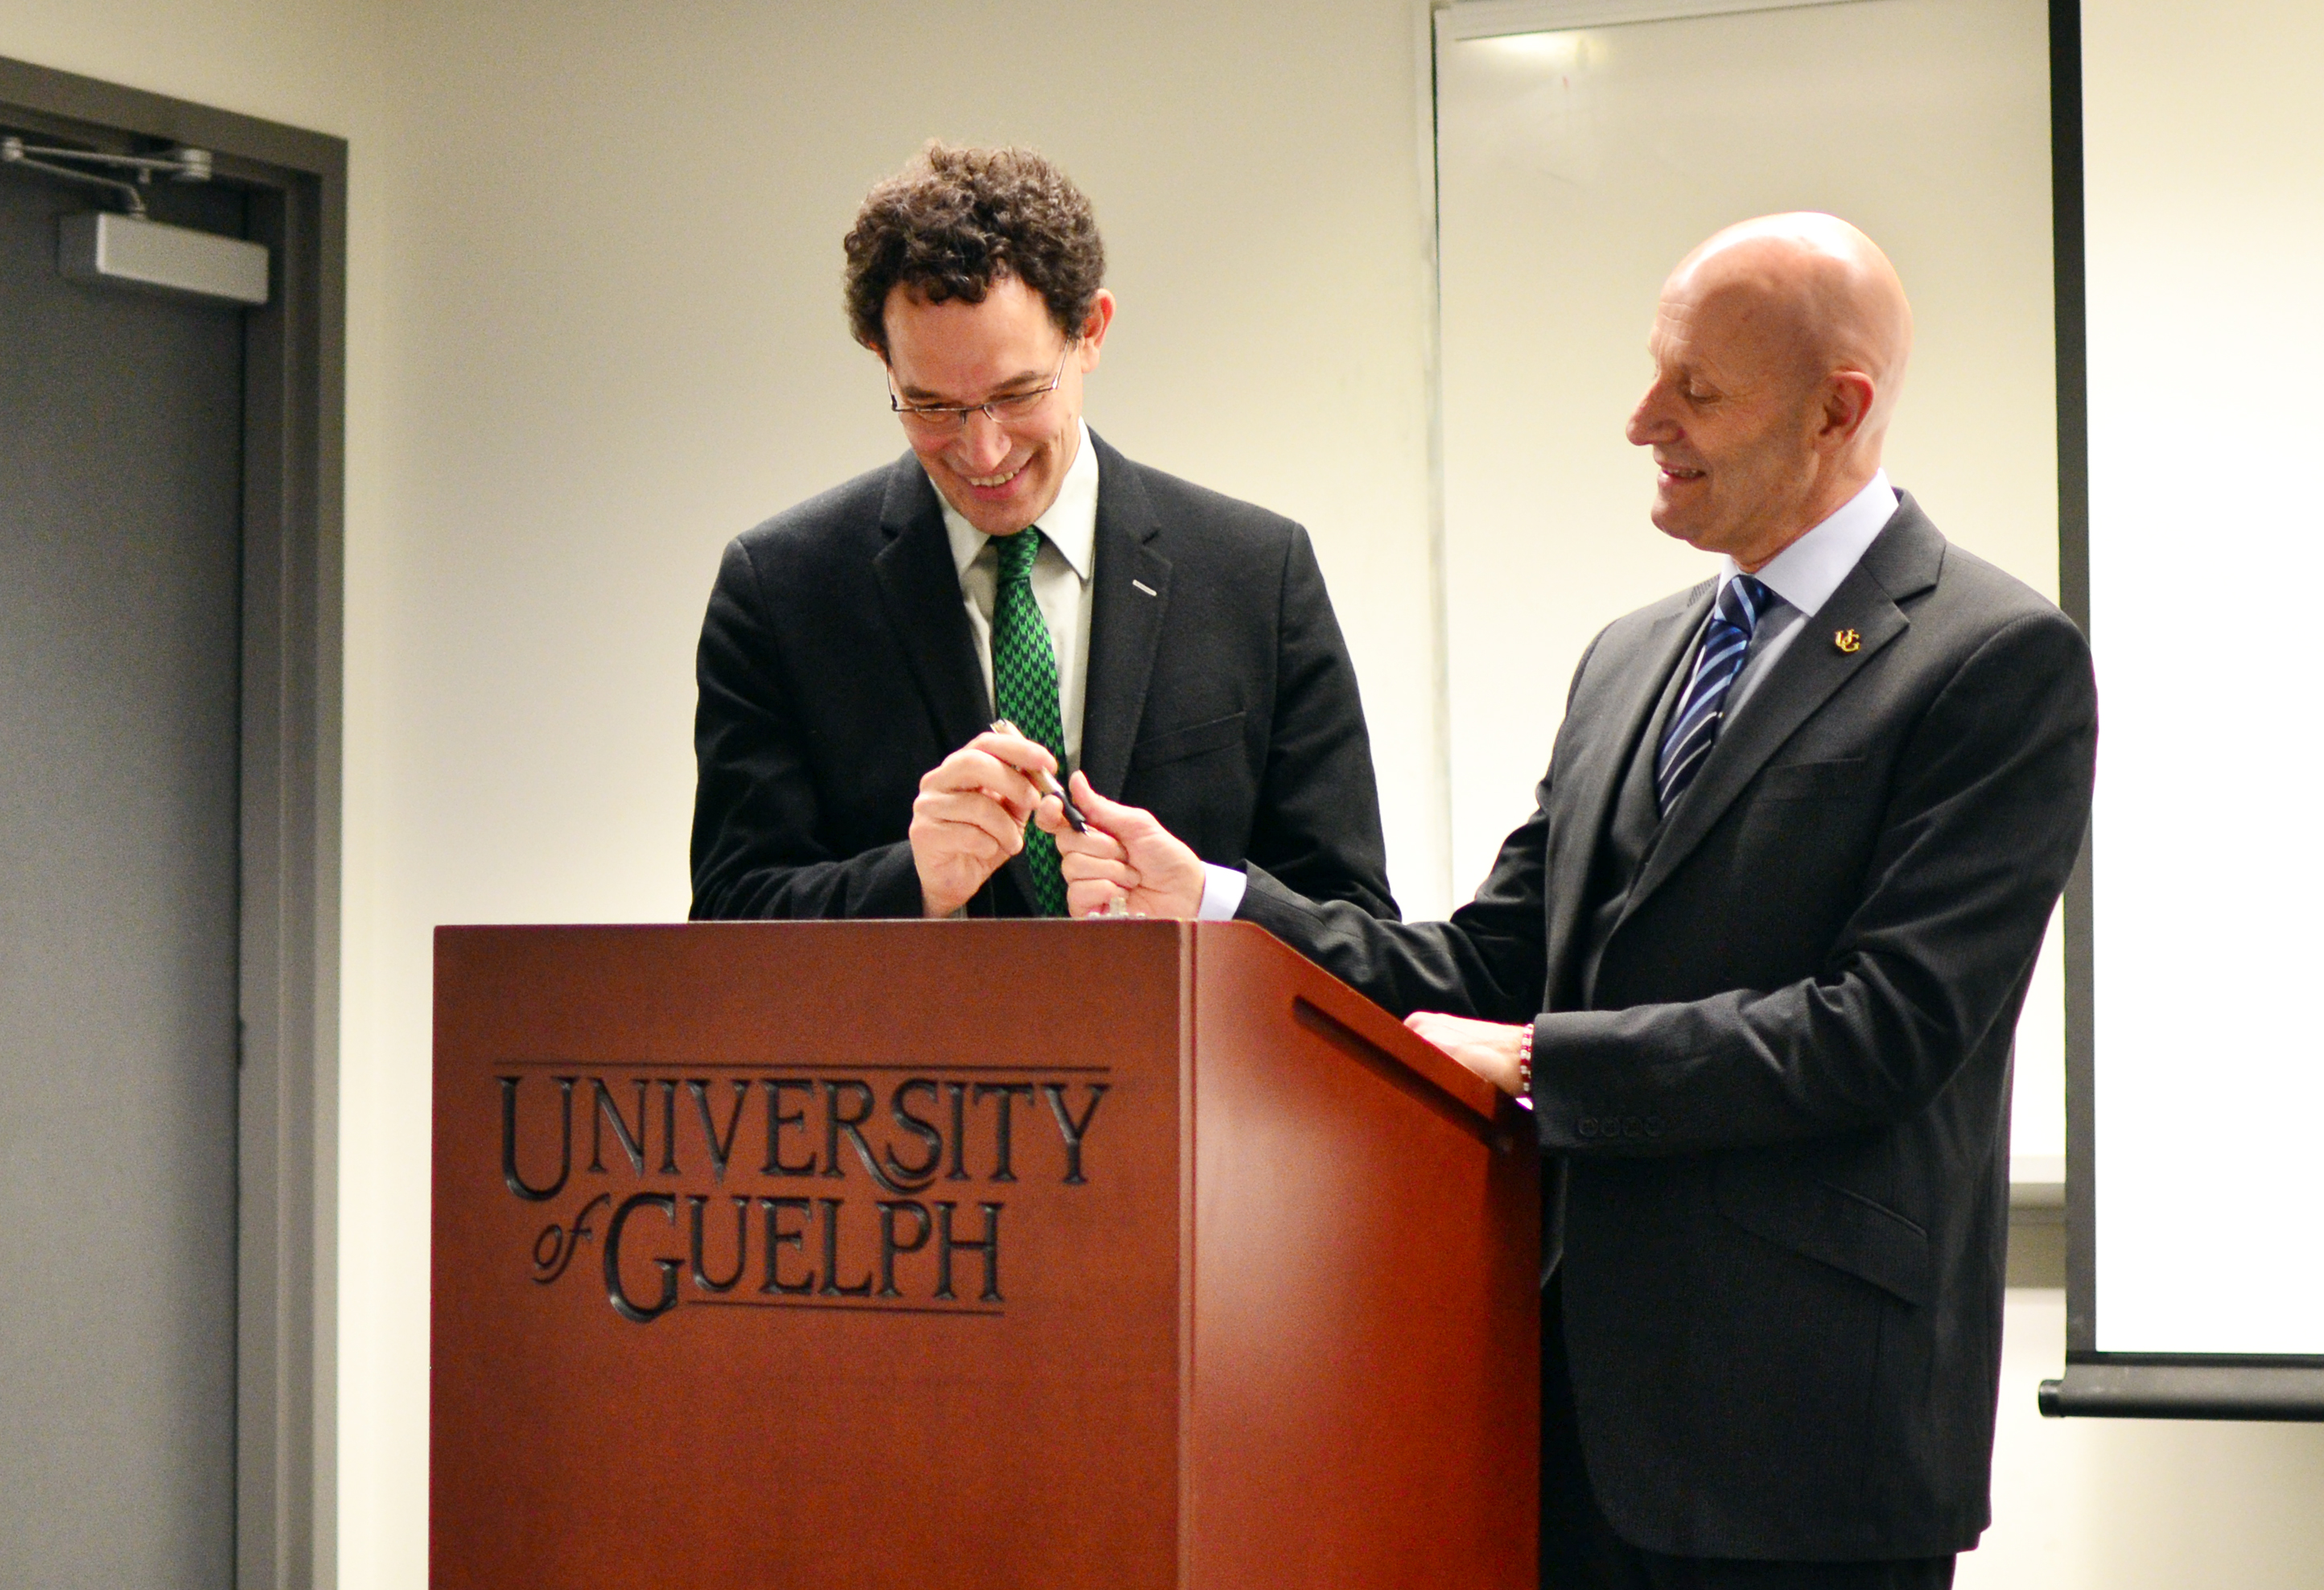 Neil Turok, PI Director and founder of AIMS, and Alastair Summerlee, University of Guelph President, signed a five-year agreement in support of the One for Many scholarship campaign on April 20, 2011